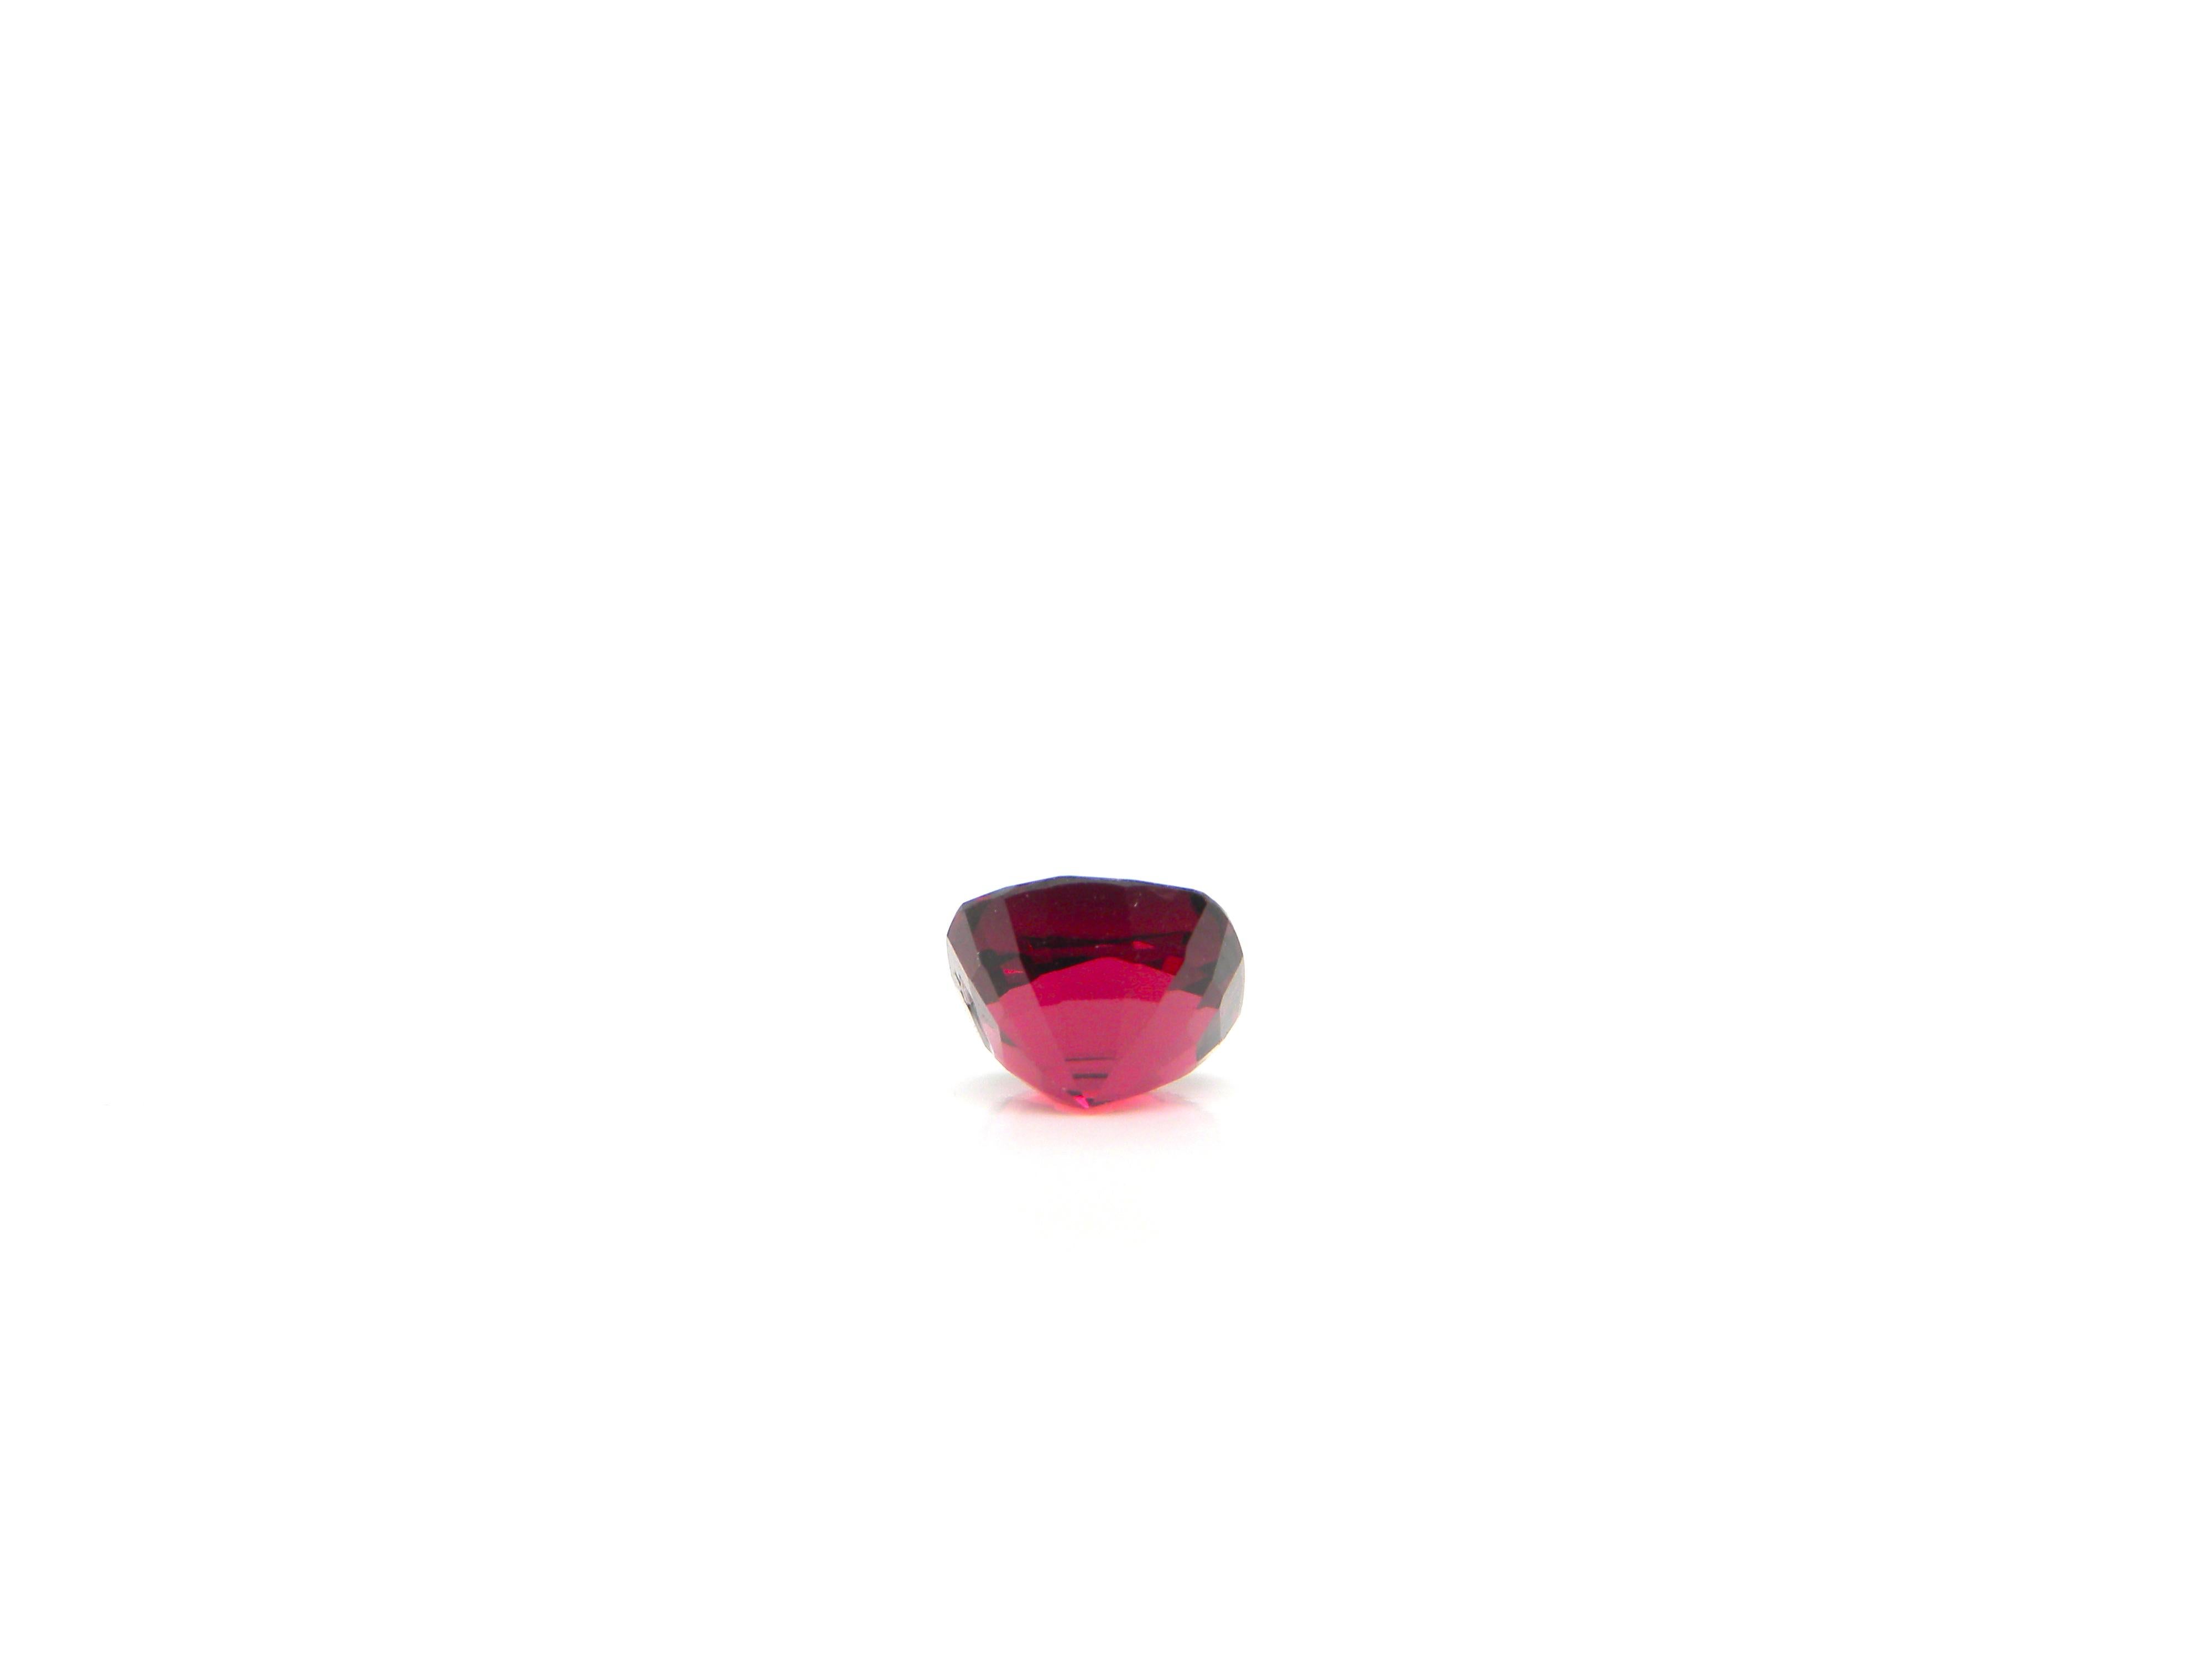 burma red spinel